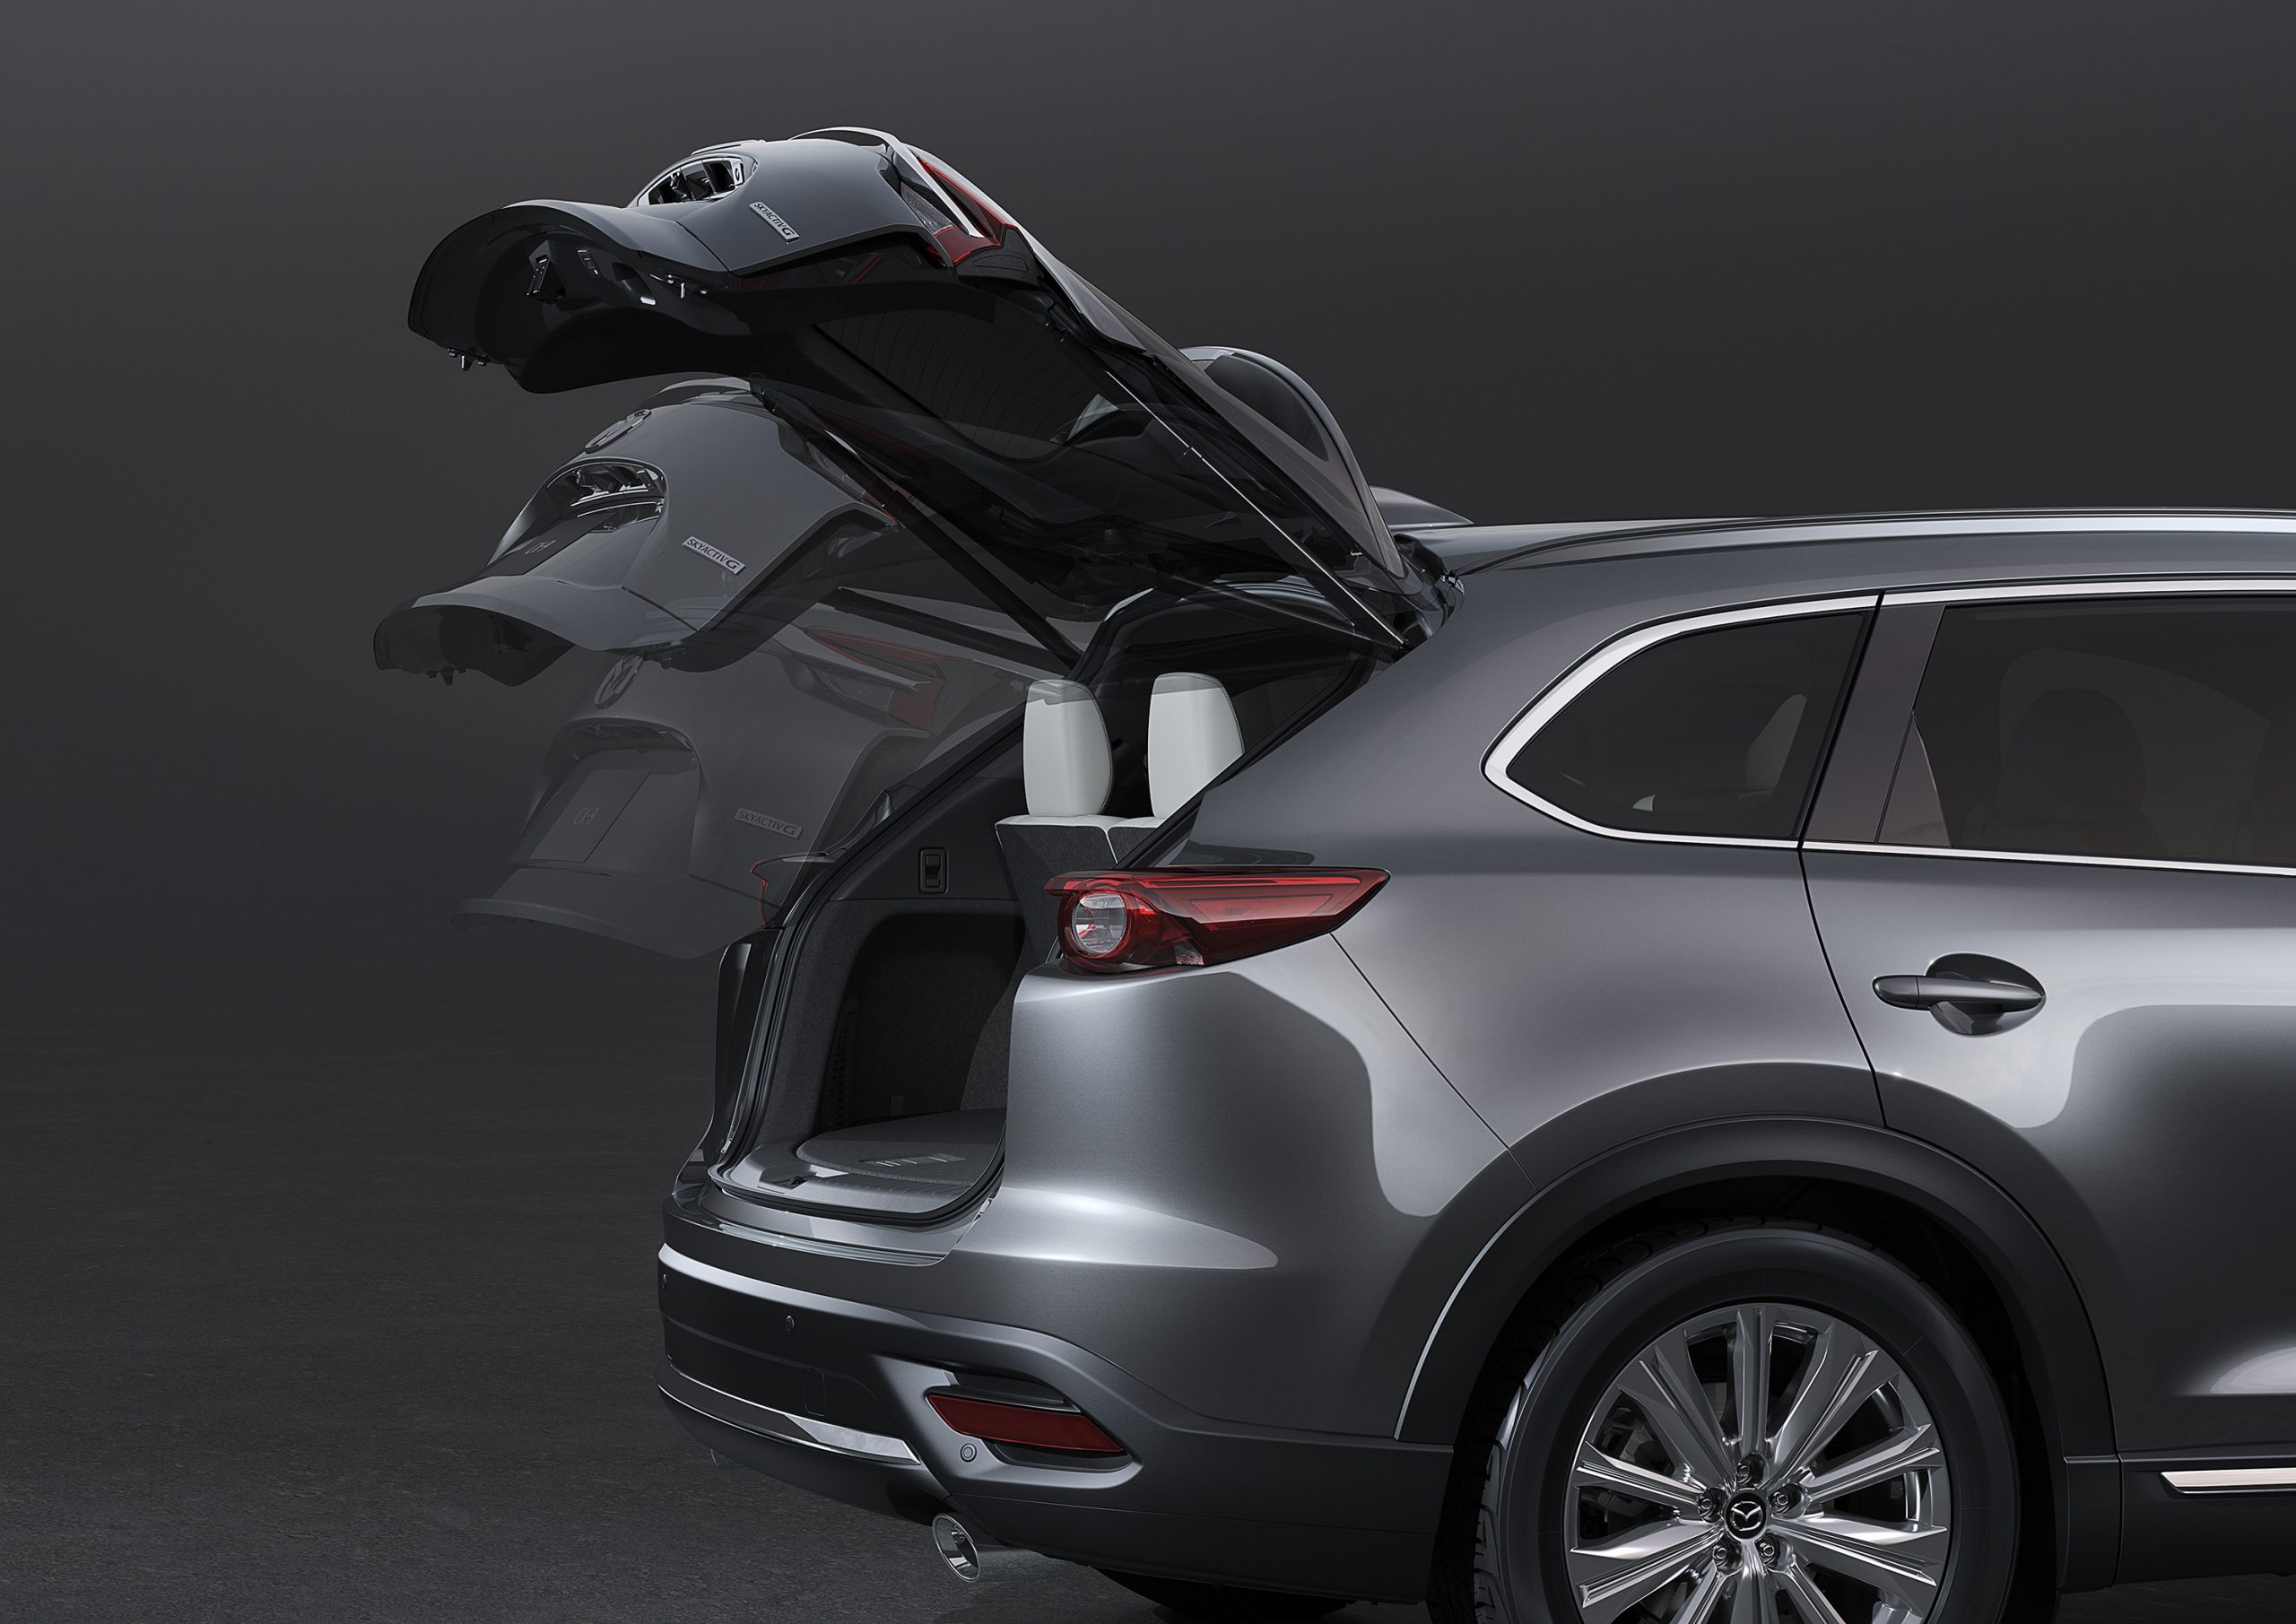 An action shot of a silver 2021 Mazda CX-9's liftgate opening, revealing its small cargo area.